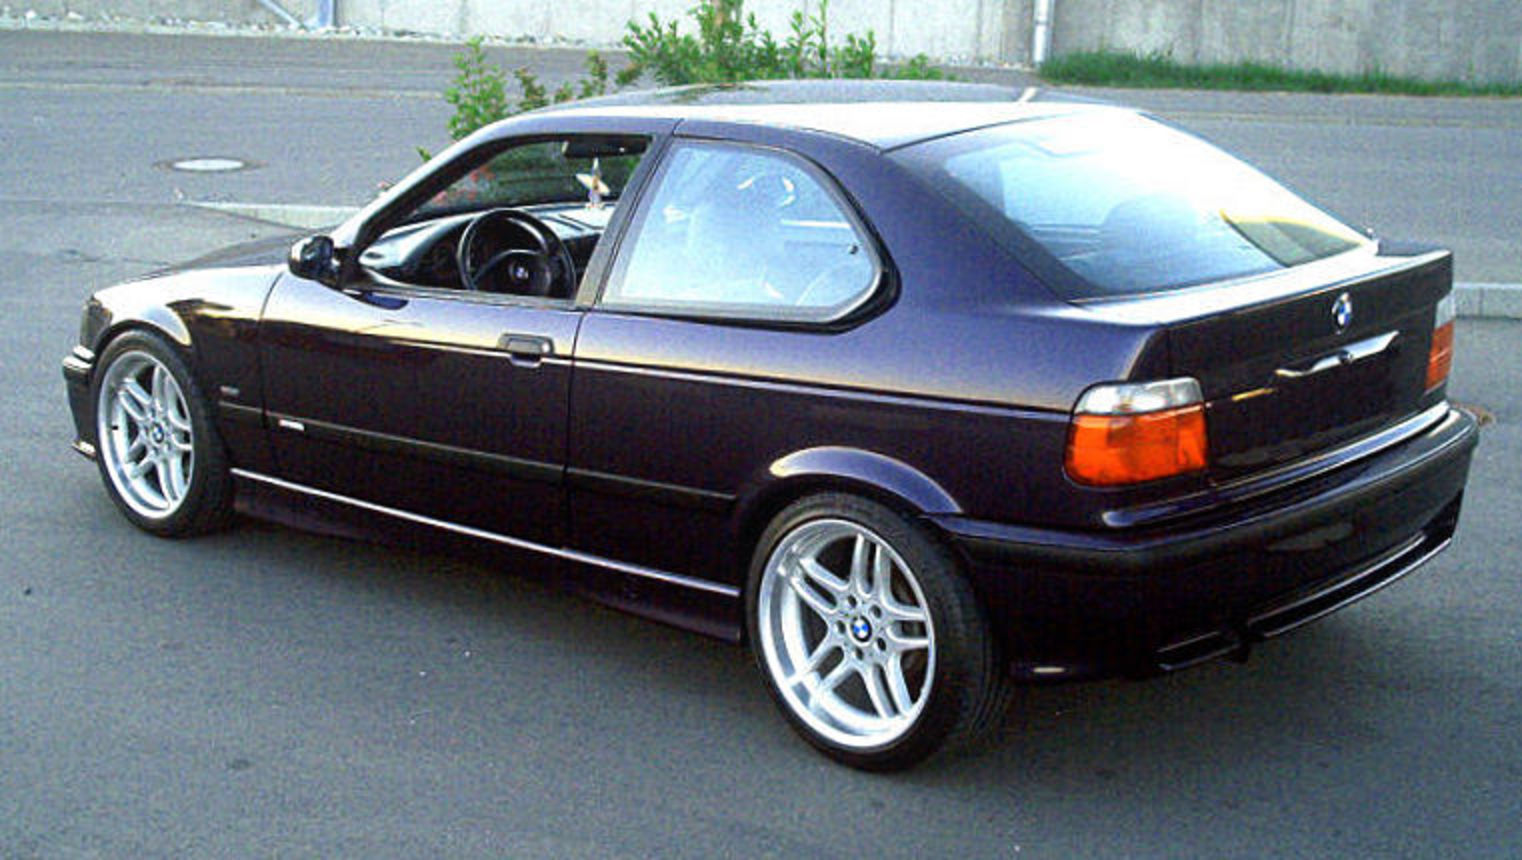 Bmw 318 compact (148 comments) Views 26708 Rating 47